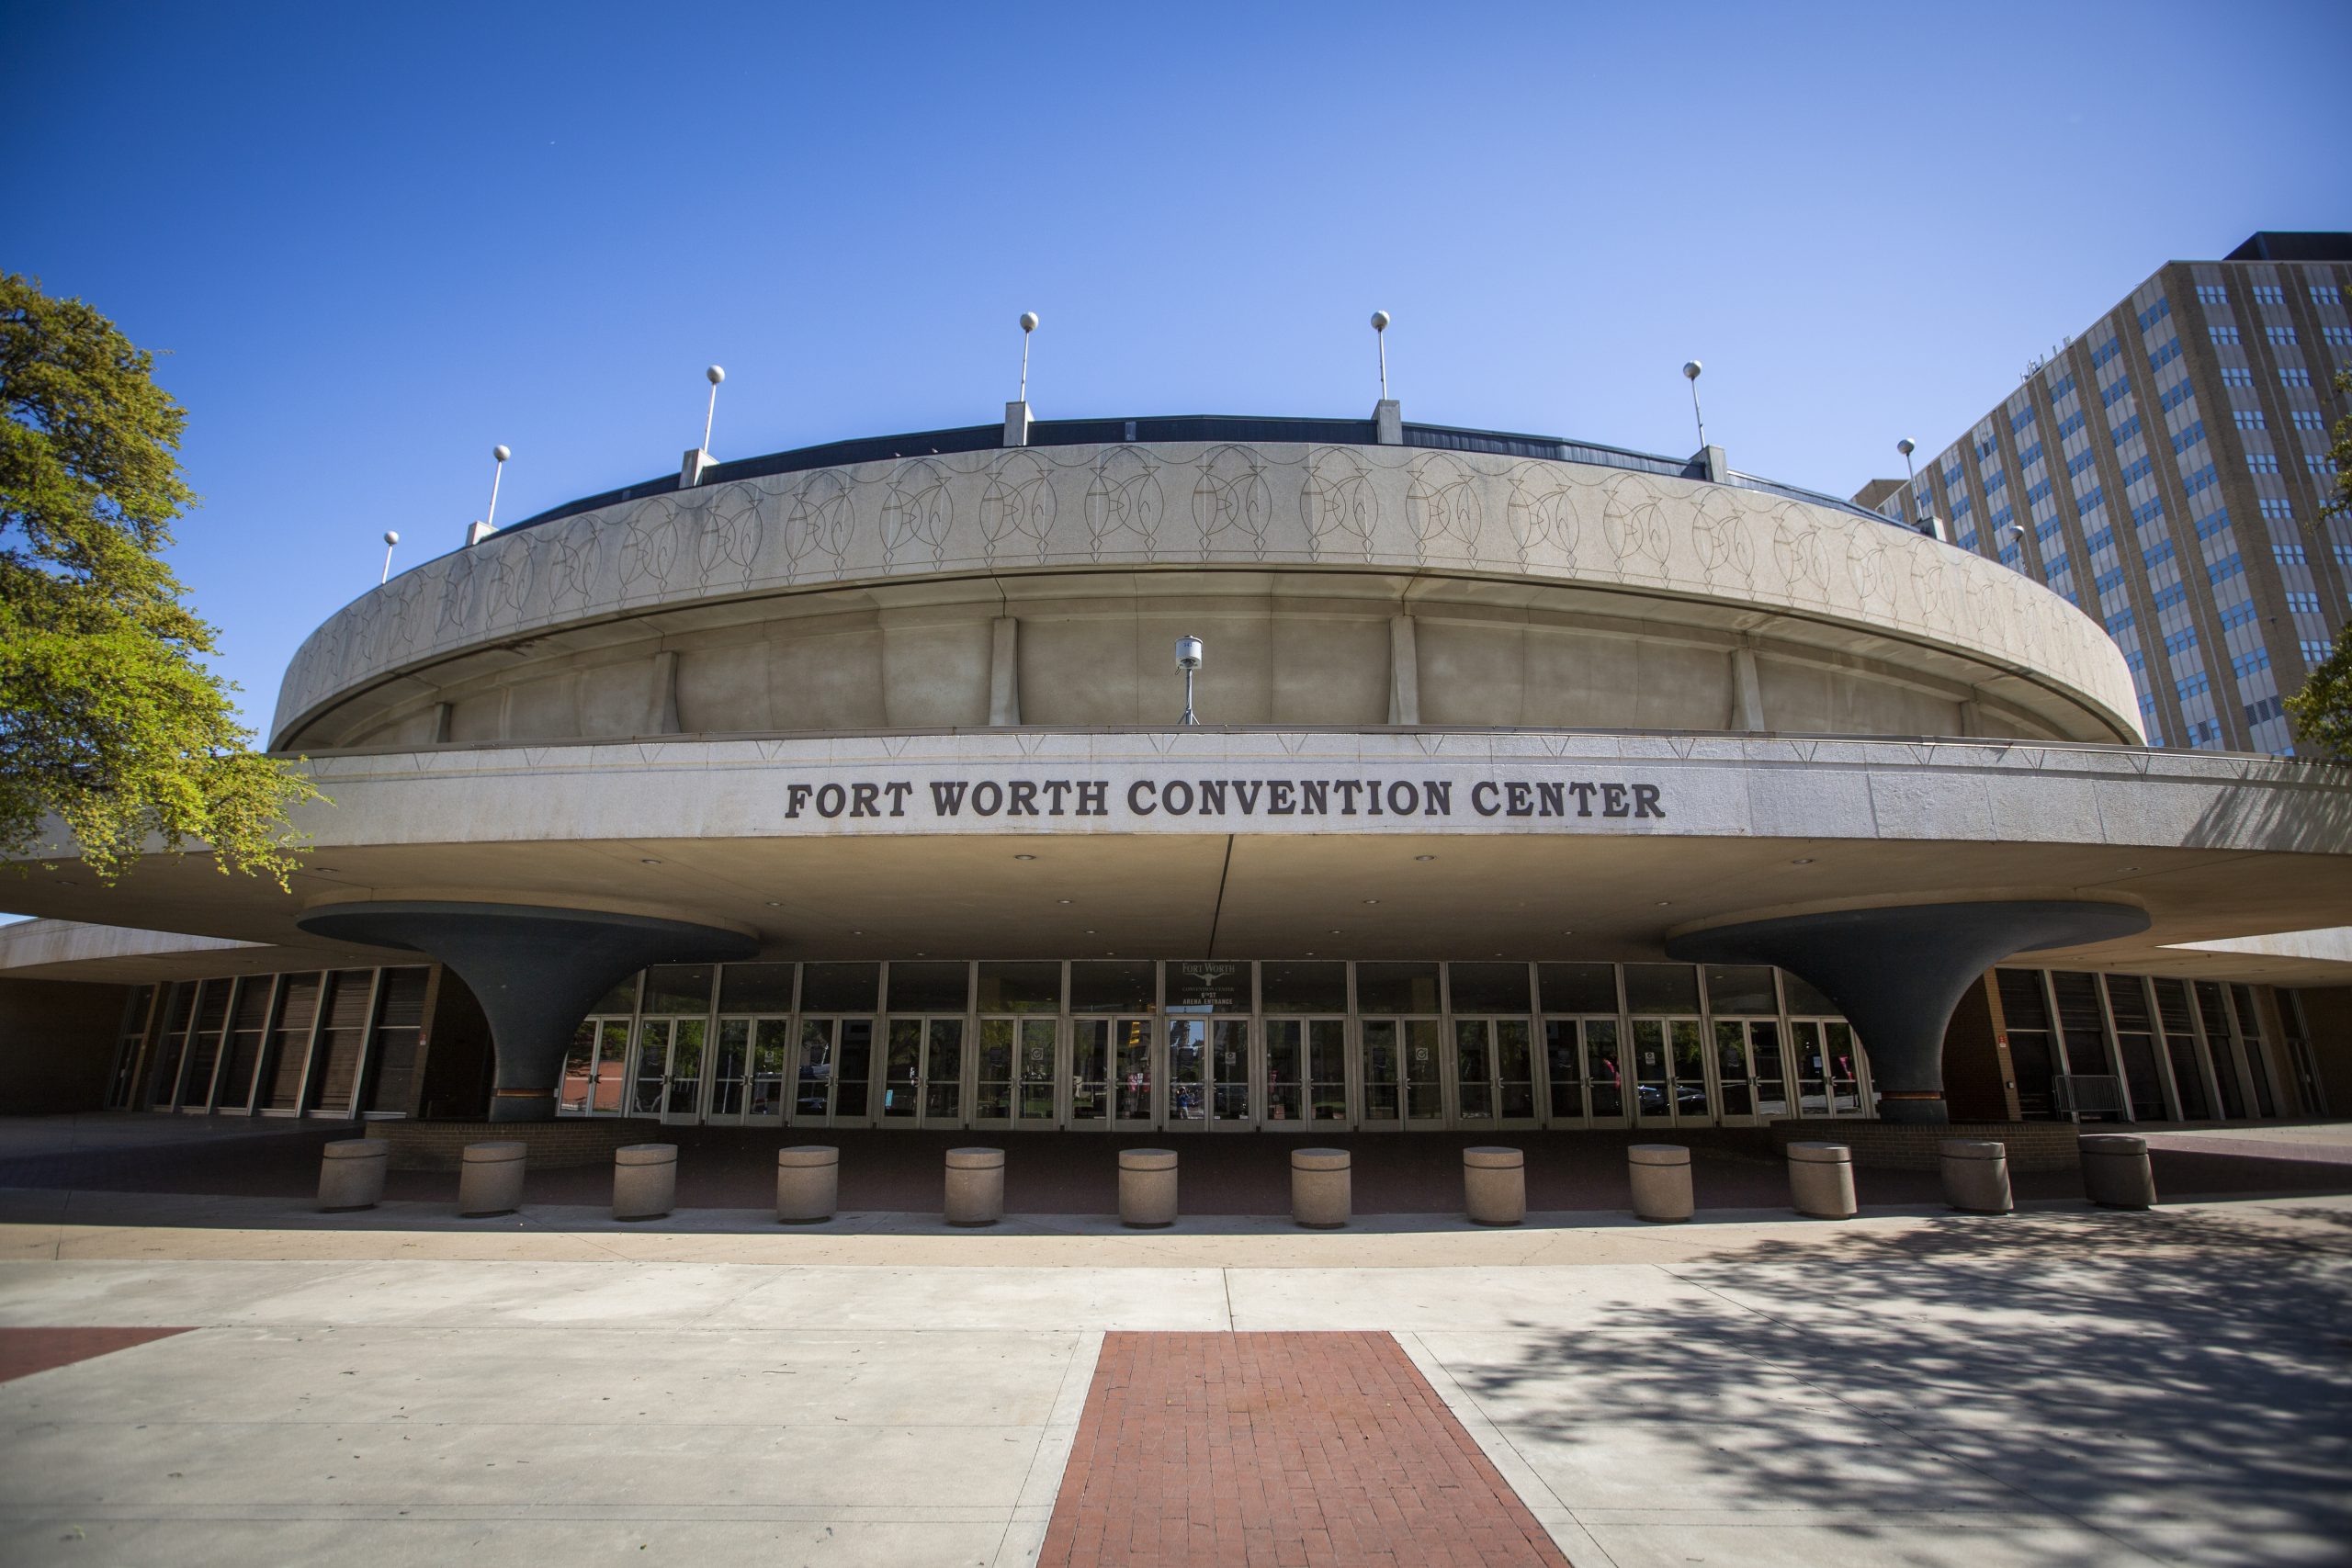 Fort worth Convention Center